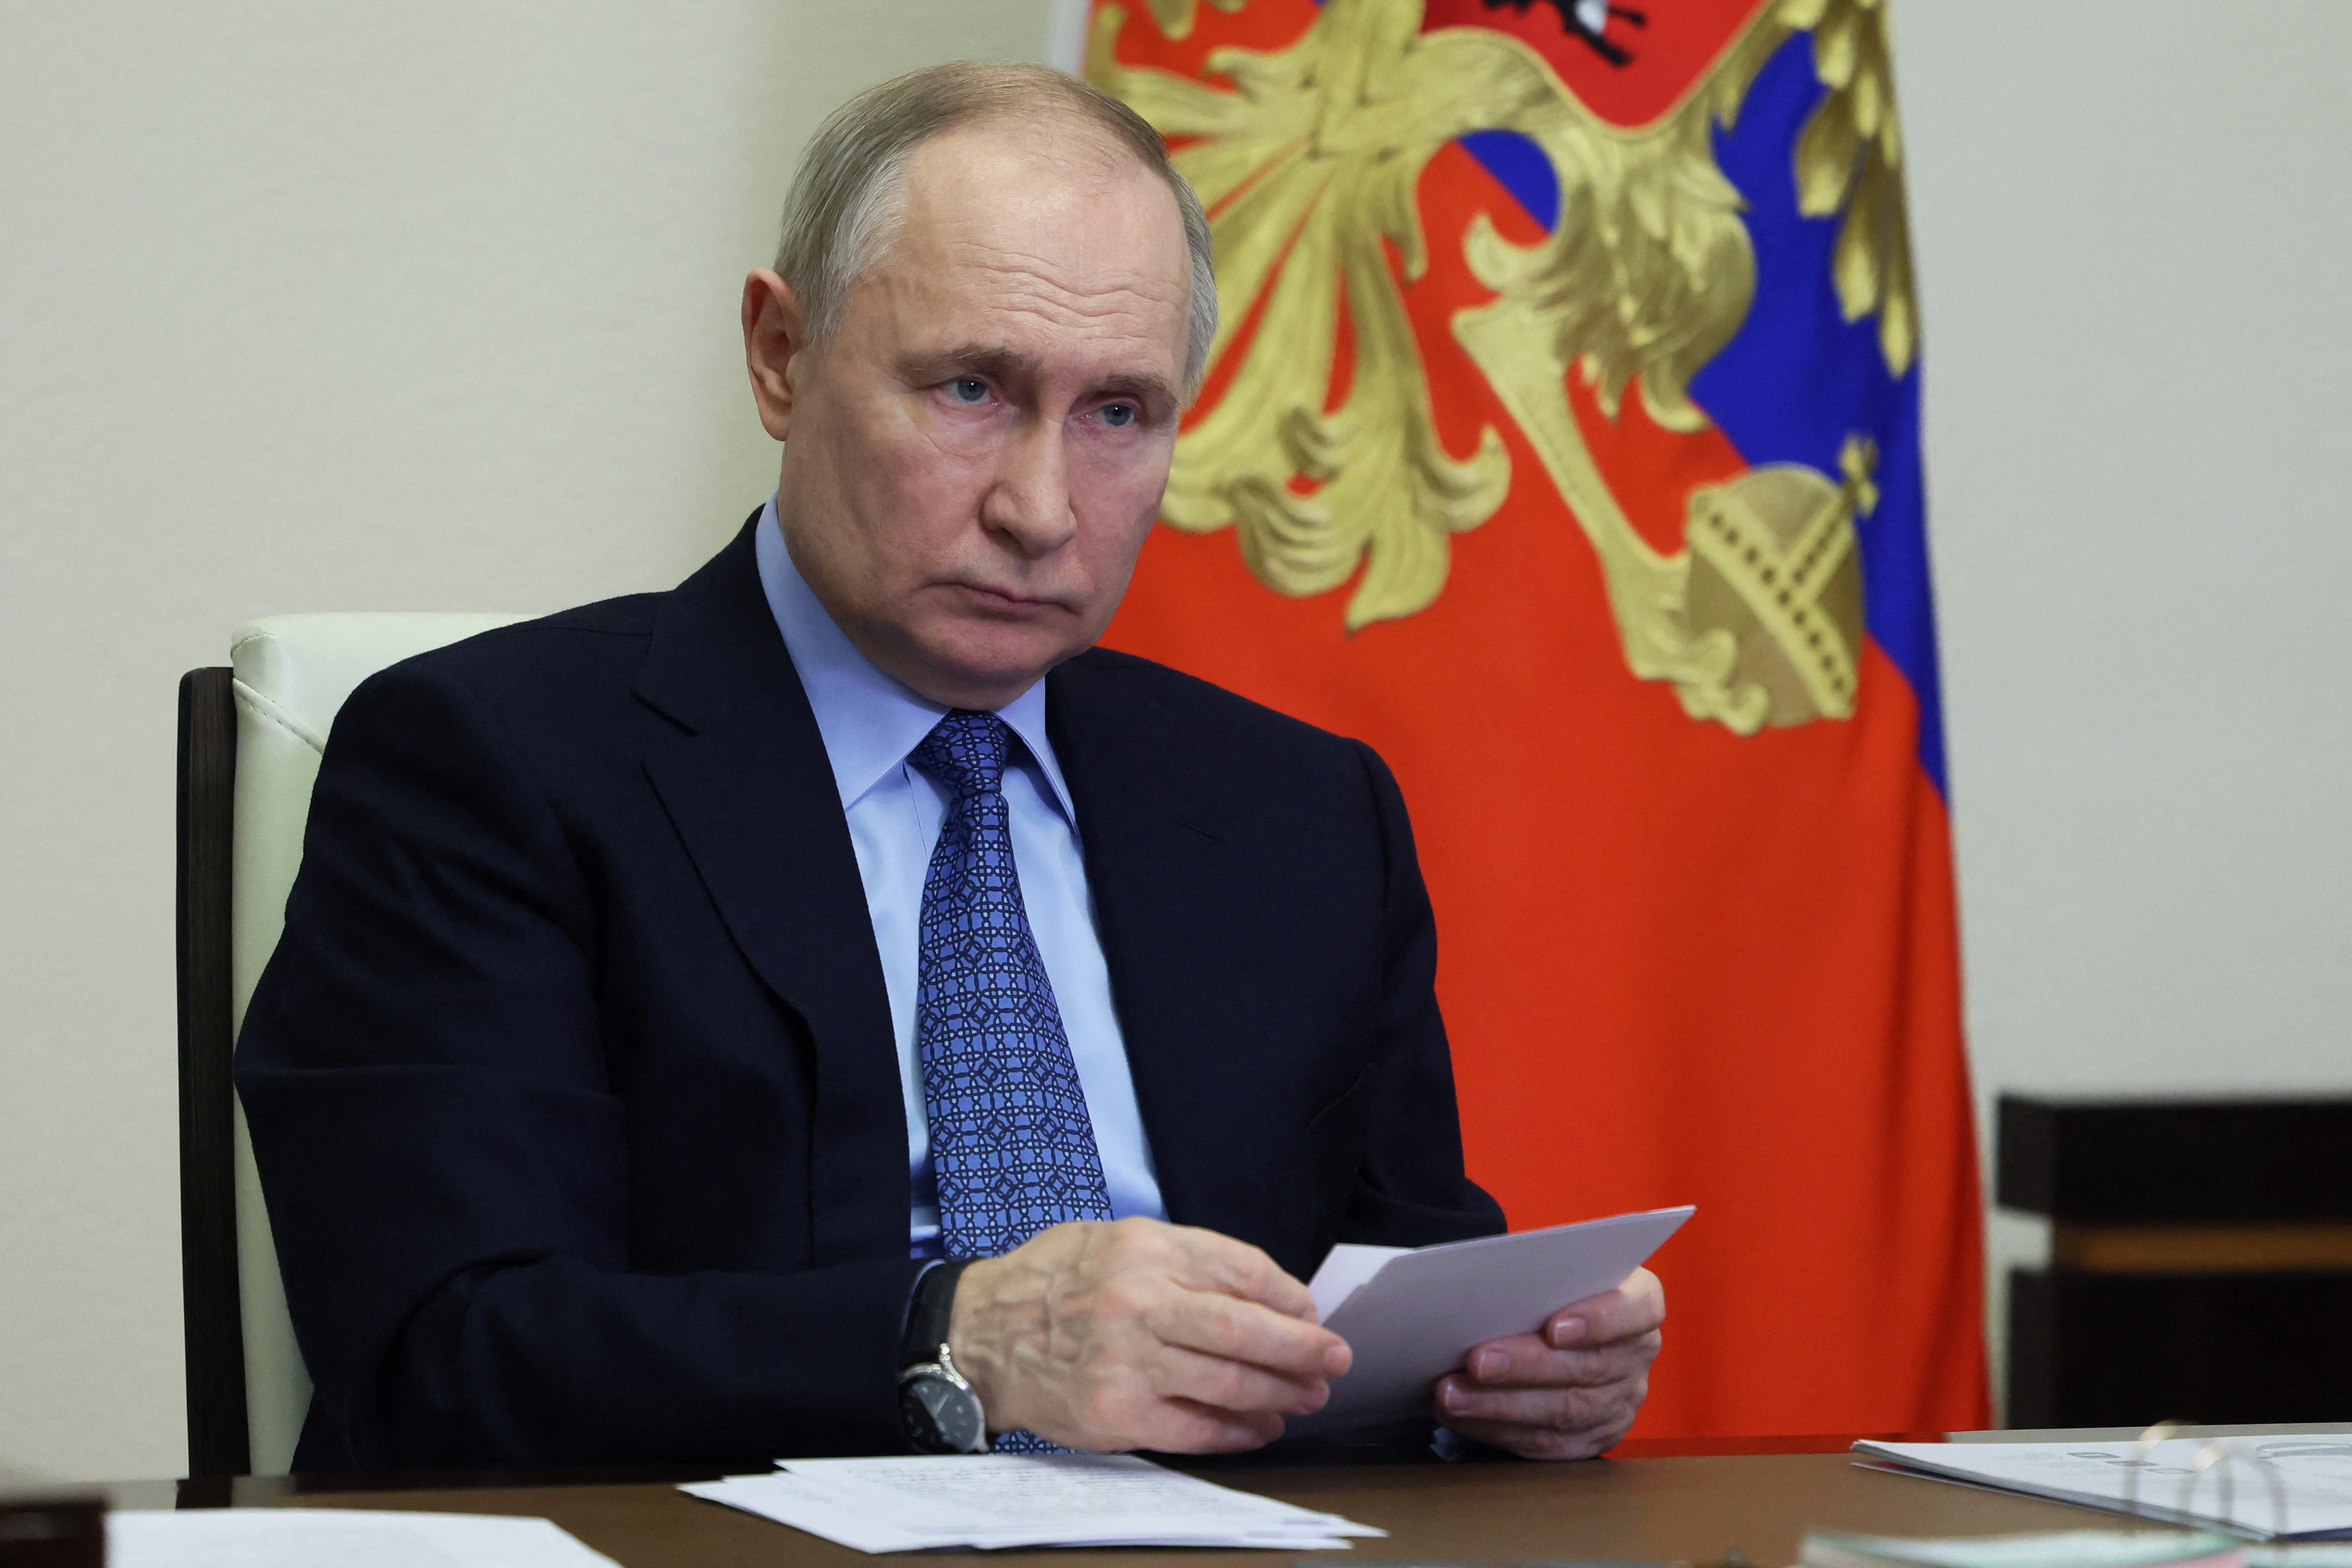 Russian President Putin chairs a meeting via video link at a residence outside Moscow